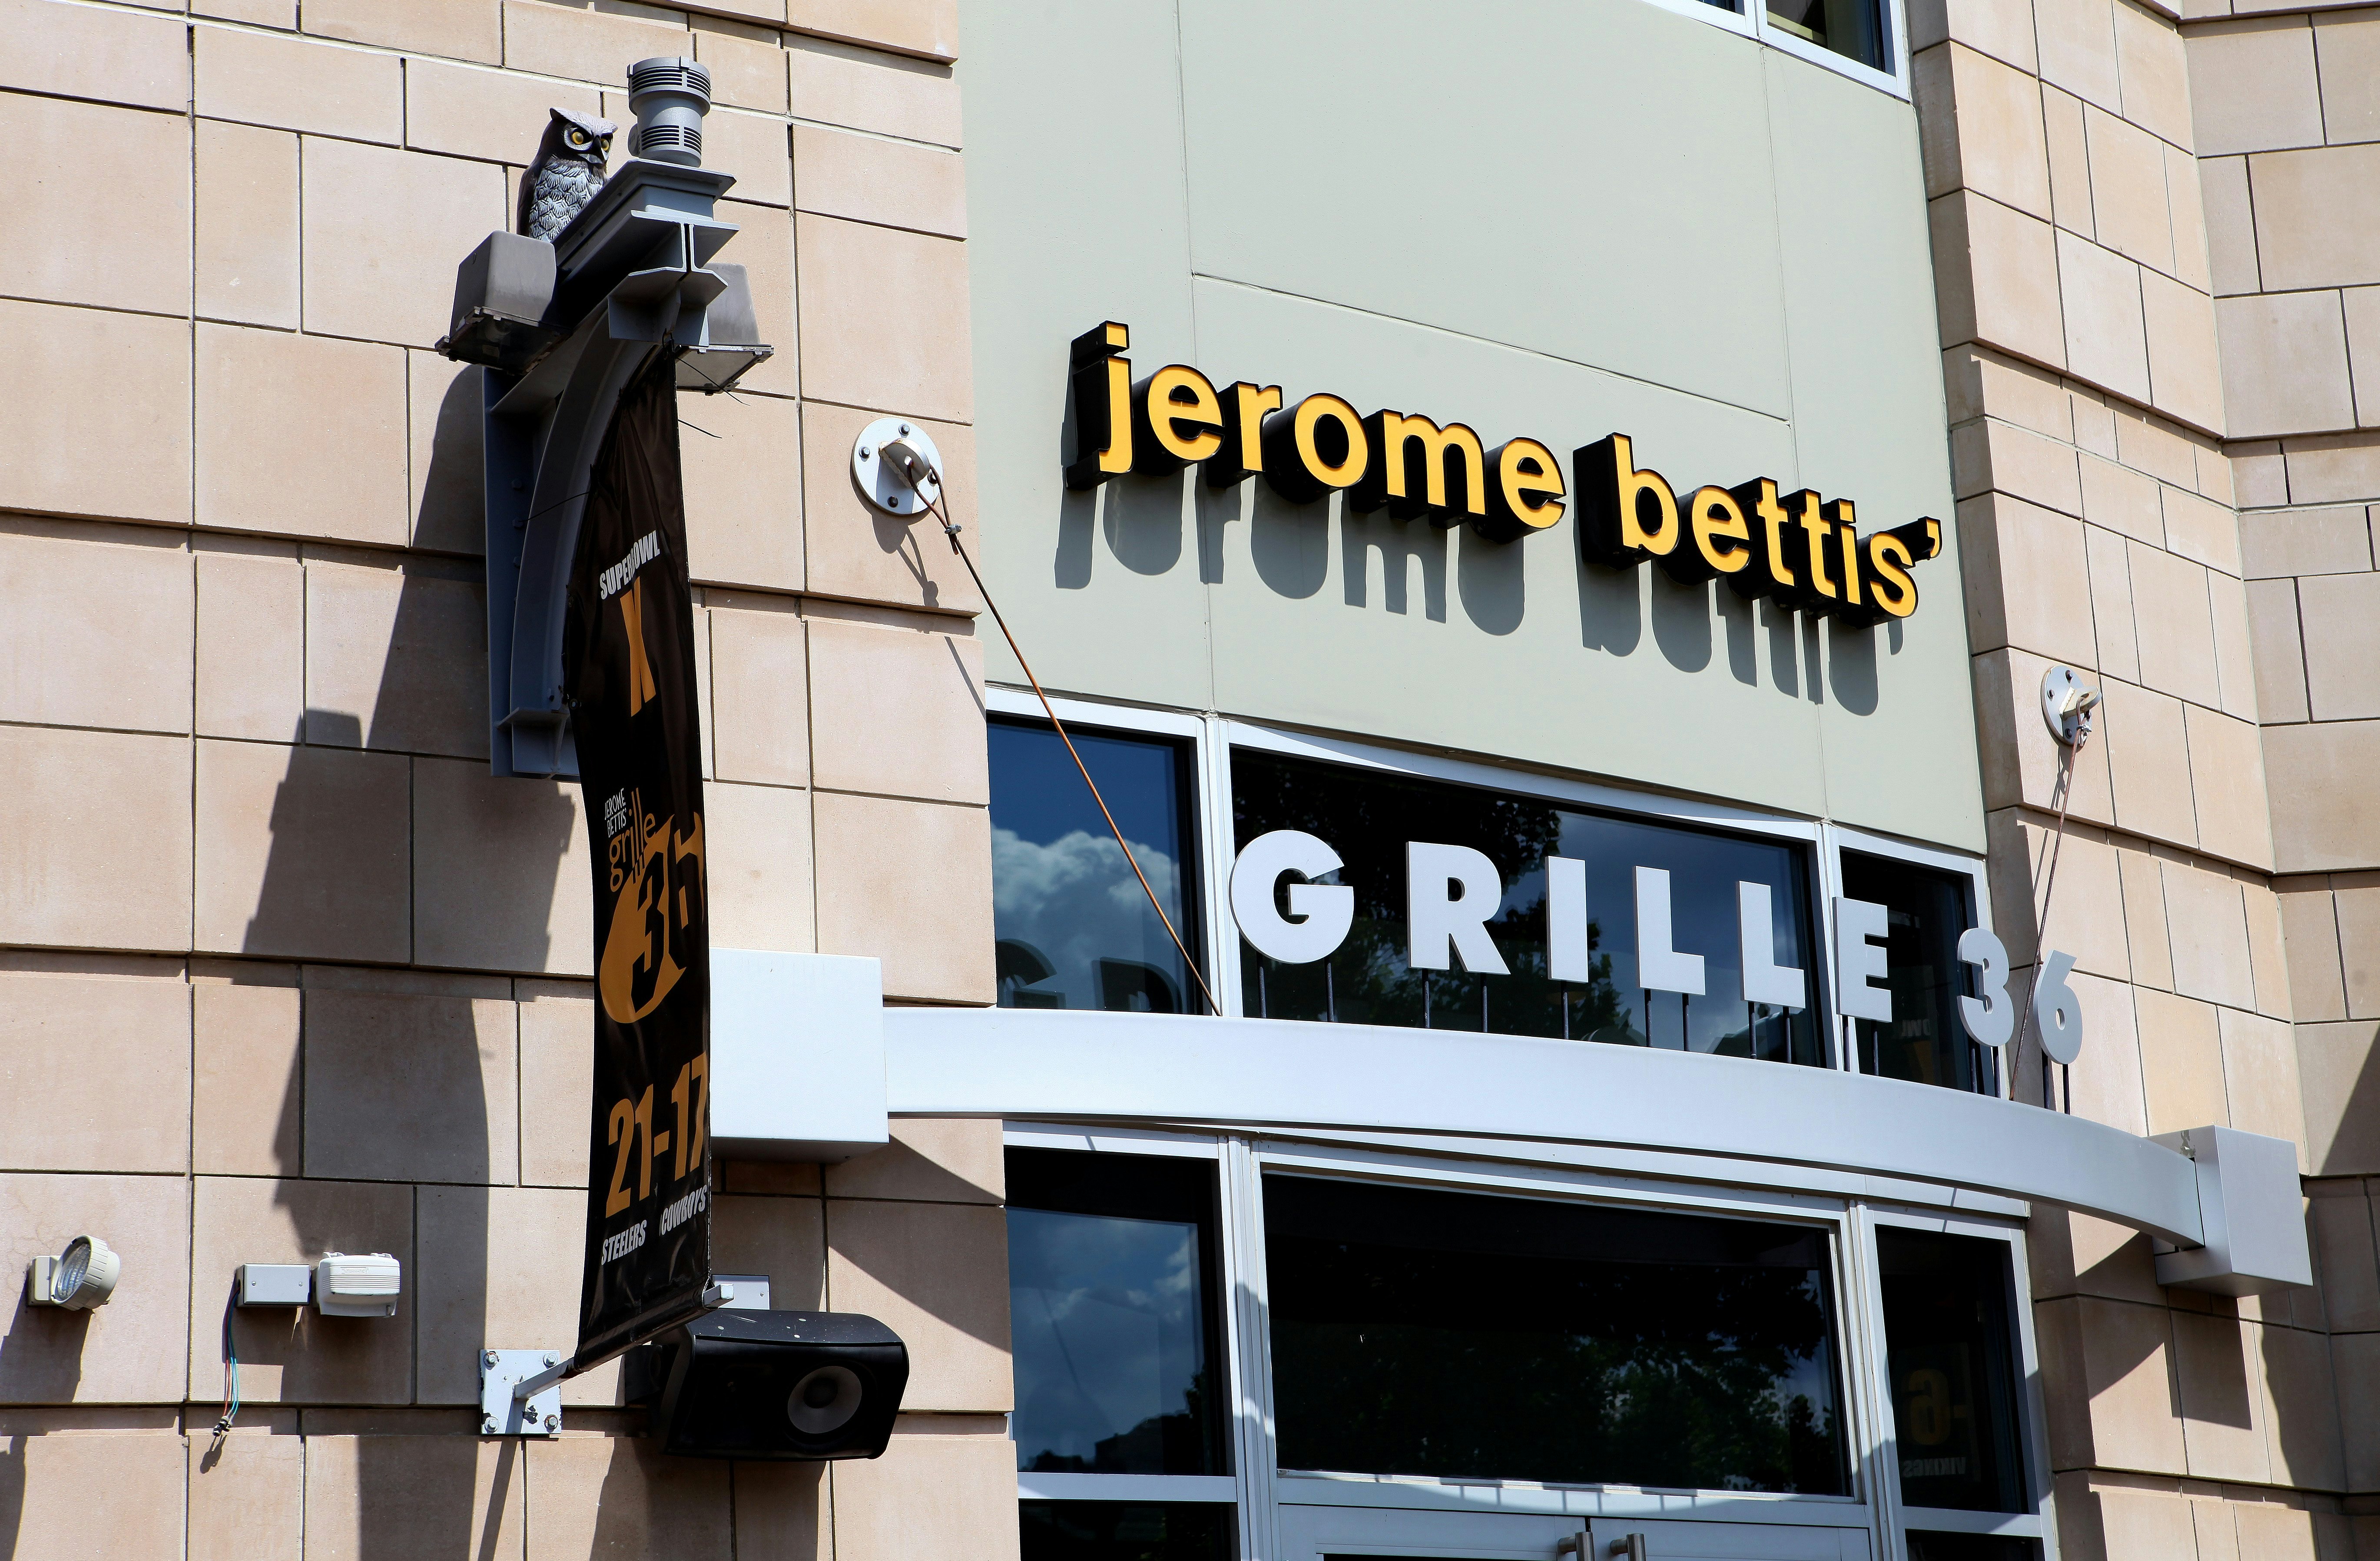 The modern facade of the Jerome Bettis’ Grille 36. The name is displayed in yellow signage.